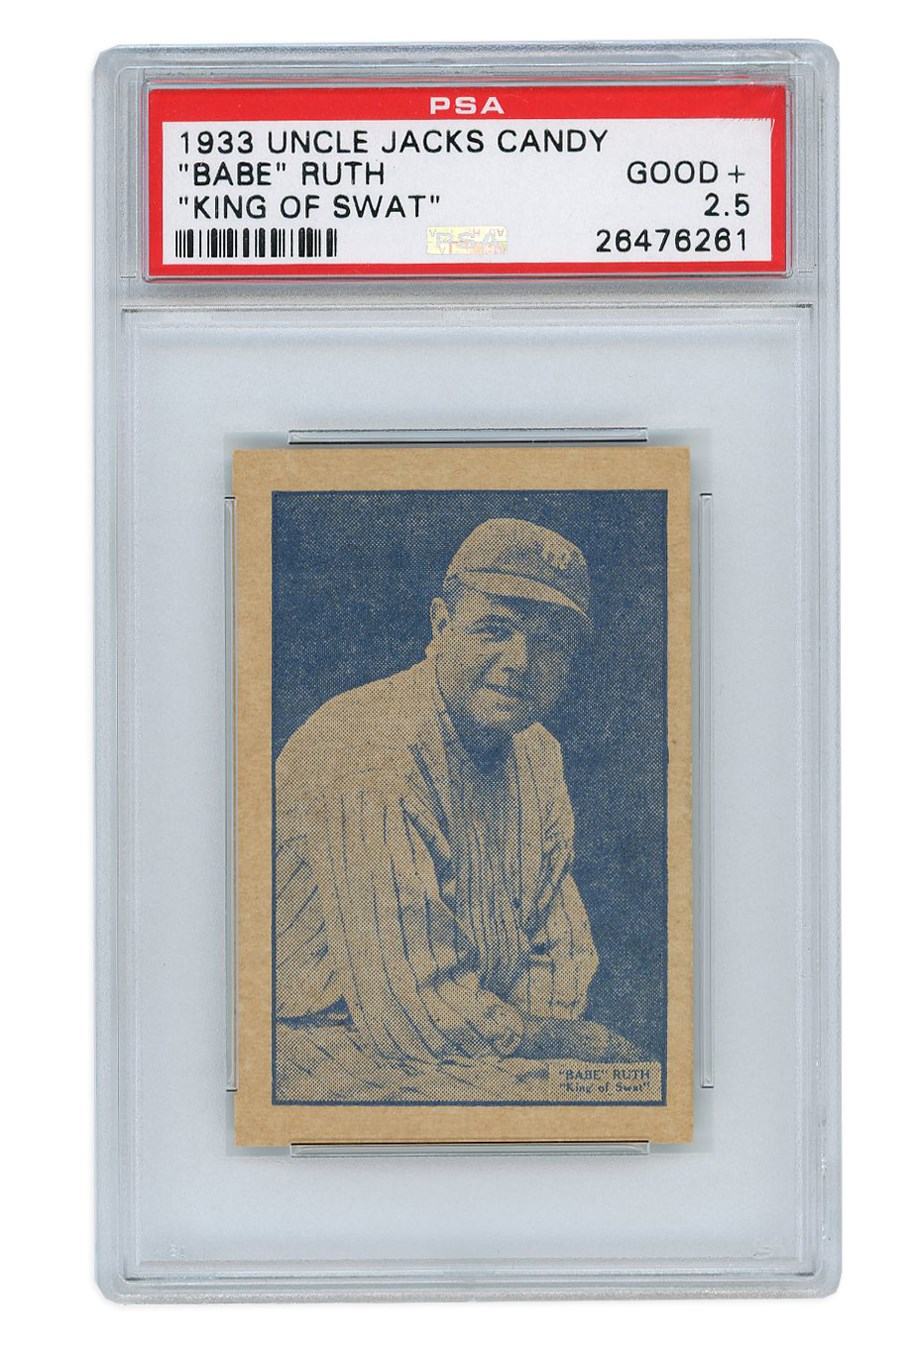 Baseball and Trading Cards - Extremely Rare 1933 Uncle Jacks Candy Babe Ruth "King of Swat" PSA GOOD+ 2.5 - Highest Graded PSA Example!